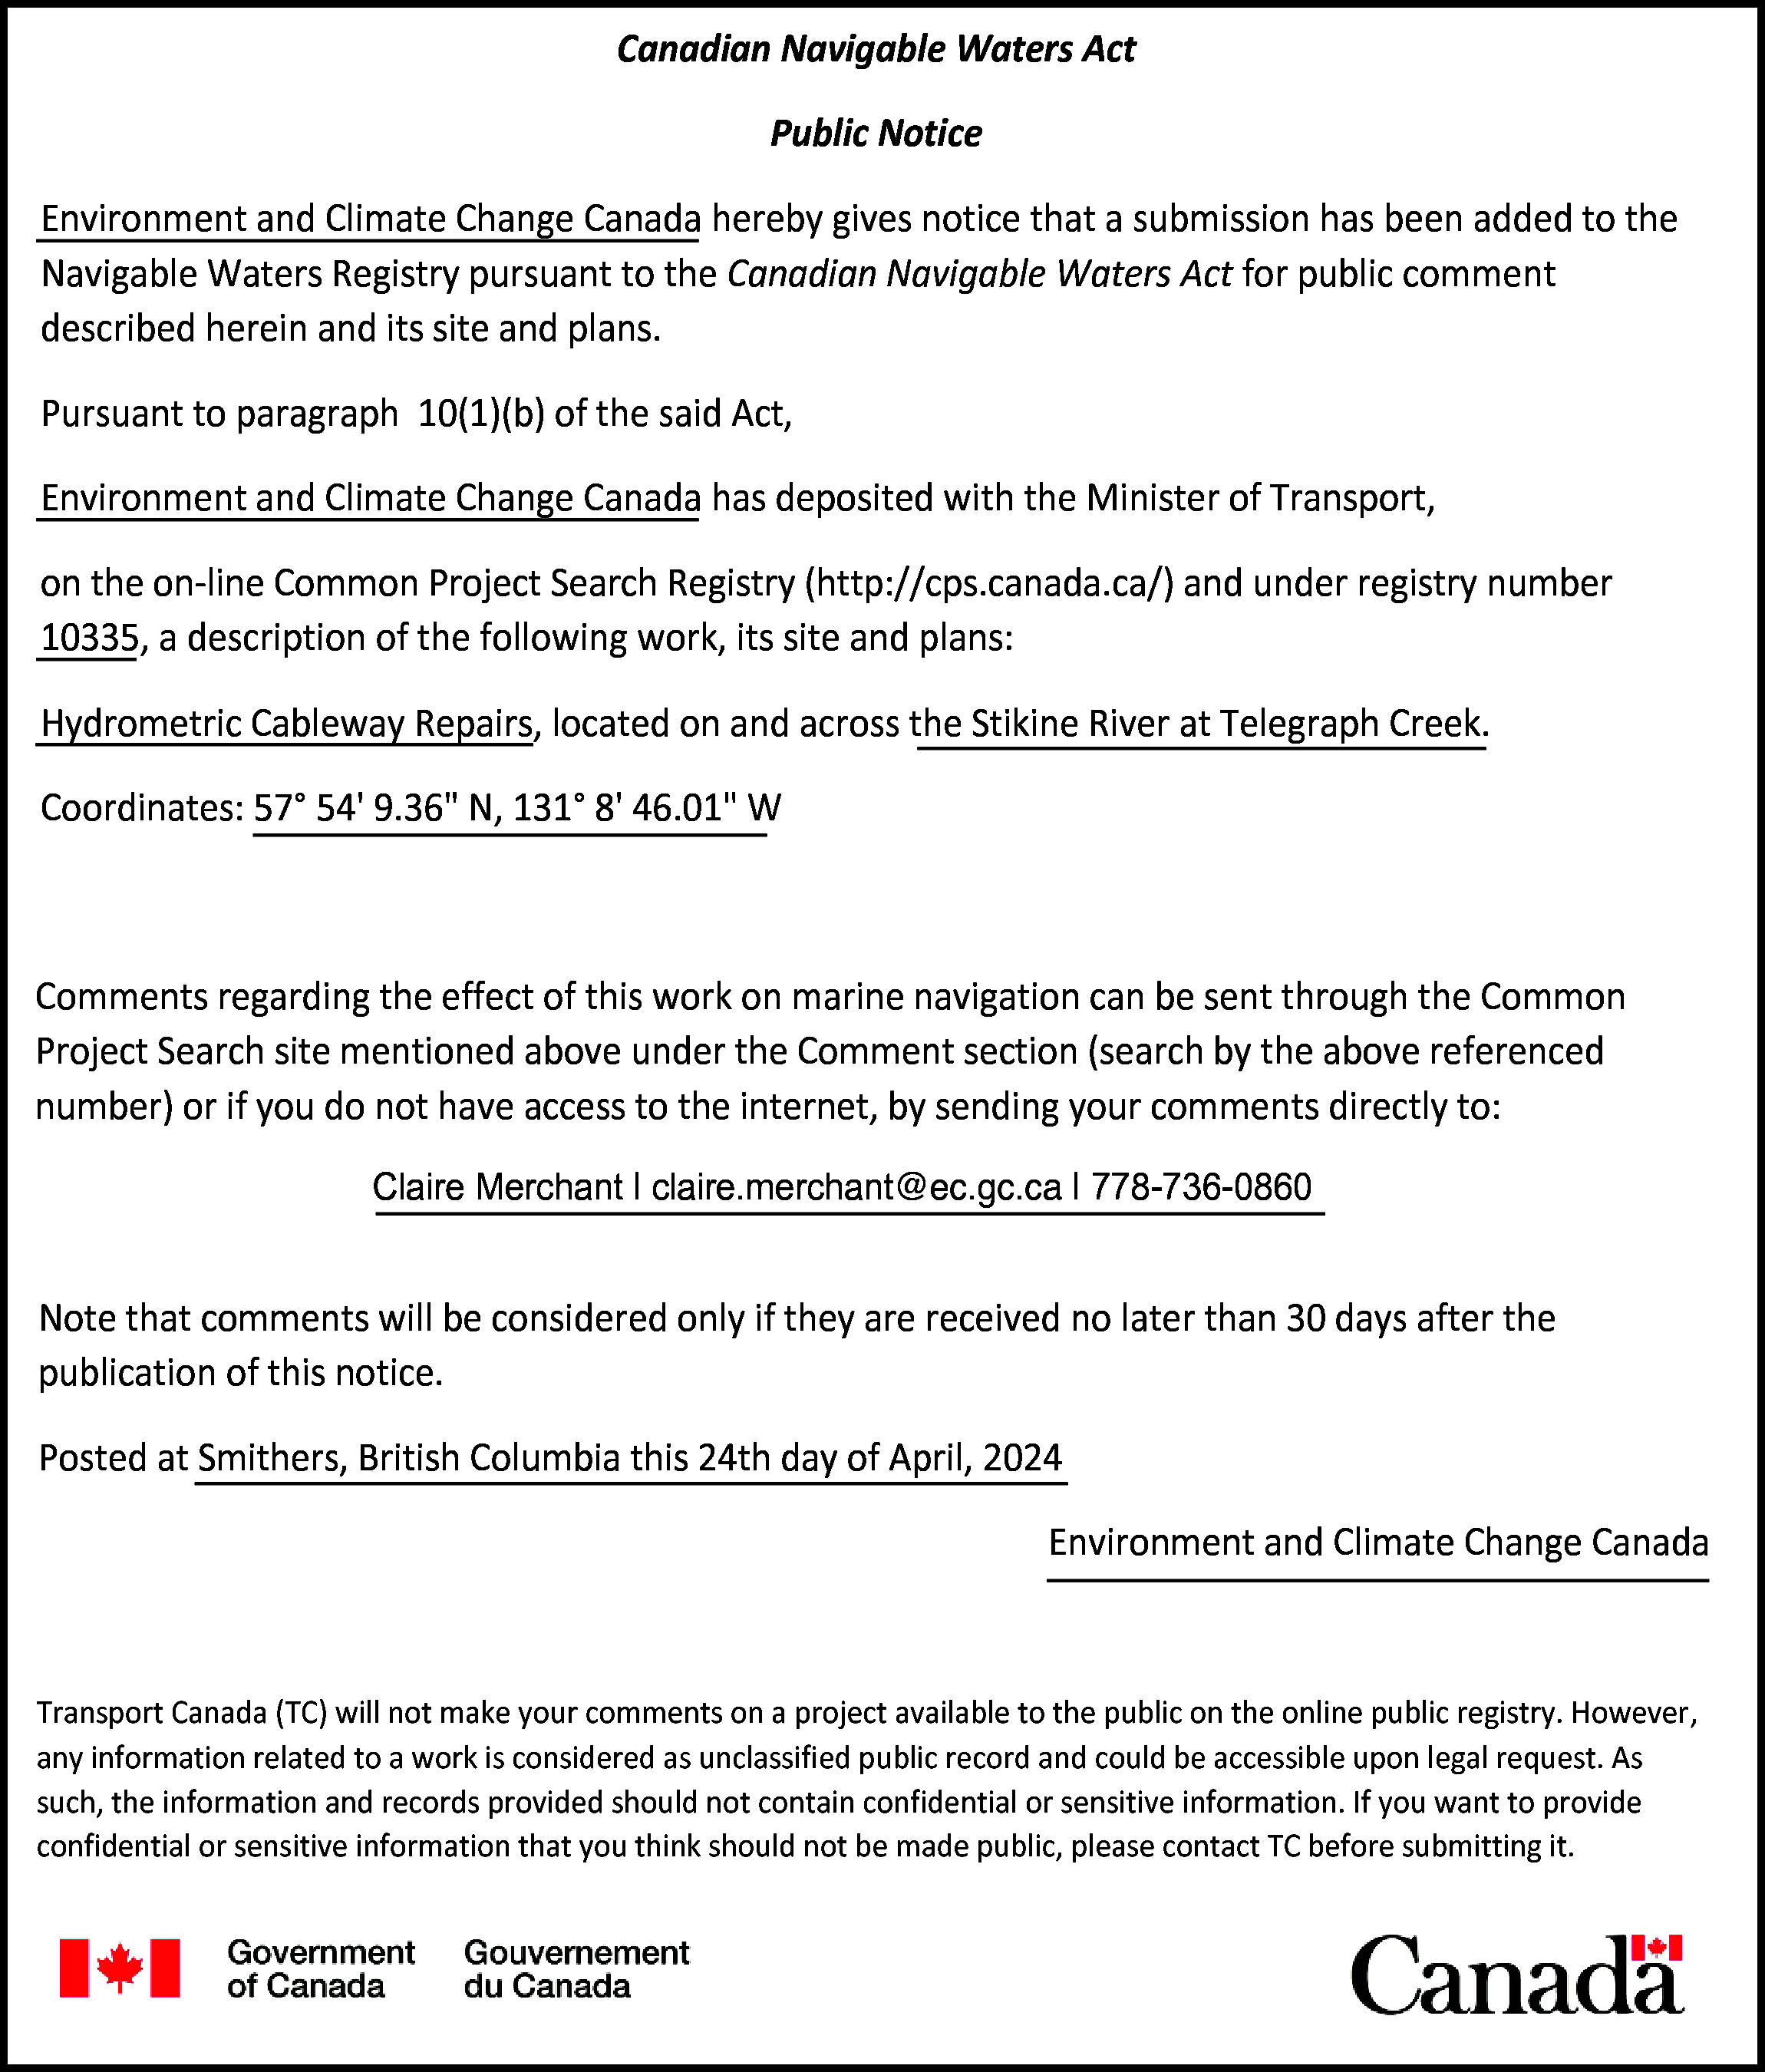 Canadian Navigable Waters Act <br>Public  Canadian Navigable Waters Act  Public Notice  Environment and Climate Change Canada hereby gives notice that a submission has been added to the  Navigable Waters Registry pursuant to the Canadian Navigable Waters Act for public comment  described herein and its site and plans.  Pursuant to paragraph 10(1)(b) of the said Act,  Environment and Climate Change Canada has deposited with the Minister of Transport,  on the on-line Common Project Search Registry (http://cps.canada.ca/) and under registry number  10335, a description of the following work, its site and plans:  Hydrometric Cableway Repairs, located on and across the Stikine River at Telegraph Creek.  Coordinates: 57° 54 9.36" N, 131° 8 46.01" W    Comments regarding the effect of this work on marine navigation can be sent through the Common  Project Search site mentioned above under the Comment section (search by the above referenced  number) or if you do not have access to the internet, by sending your comments directly to:  Claire Merchant | claire.merchant@ec.gc.ca | 778-736-0860    Note that comments will be considered only if they are received no later than 30 days after the  publication of this notice.  Posted at Smithers, British Columbia this 24th day of April, 2024  Environment and Climate Change Canada    Transport Canada (TC) will not make your comments on a project available to the public on the online public registry. However,  any information related to a work is considered as unclassified public record and could be accessible upon legal request. As  such, the information and records provided should not contain confidential or sensitive information. If you want to provide  confidential or sensitive information that you think should not be made public, please contact TC before submitting it.    